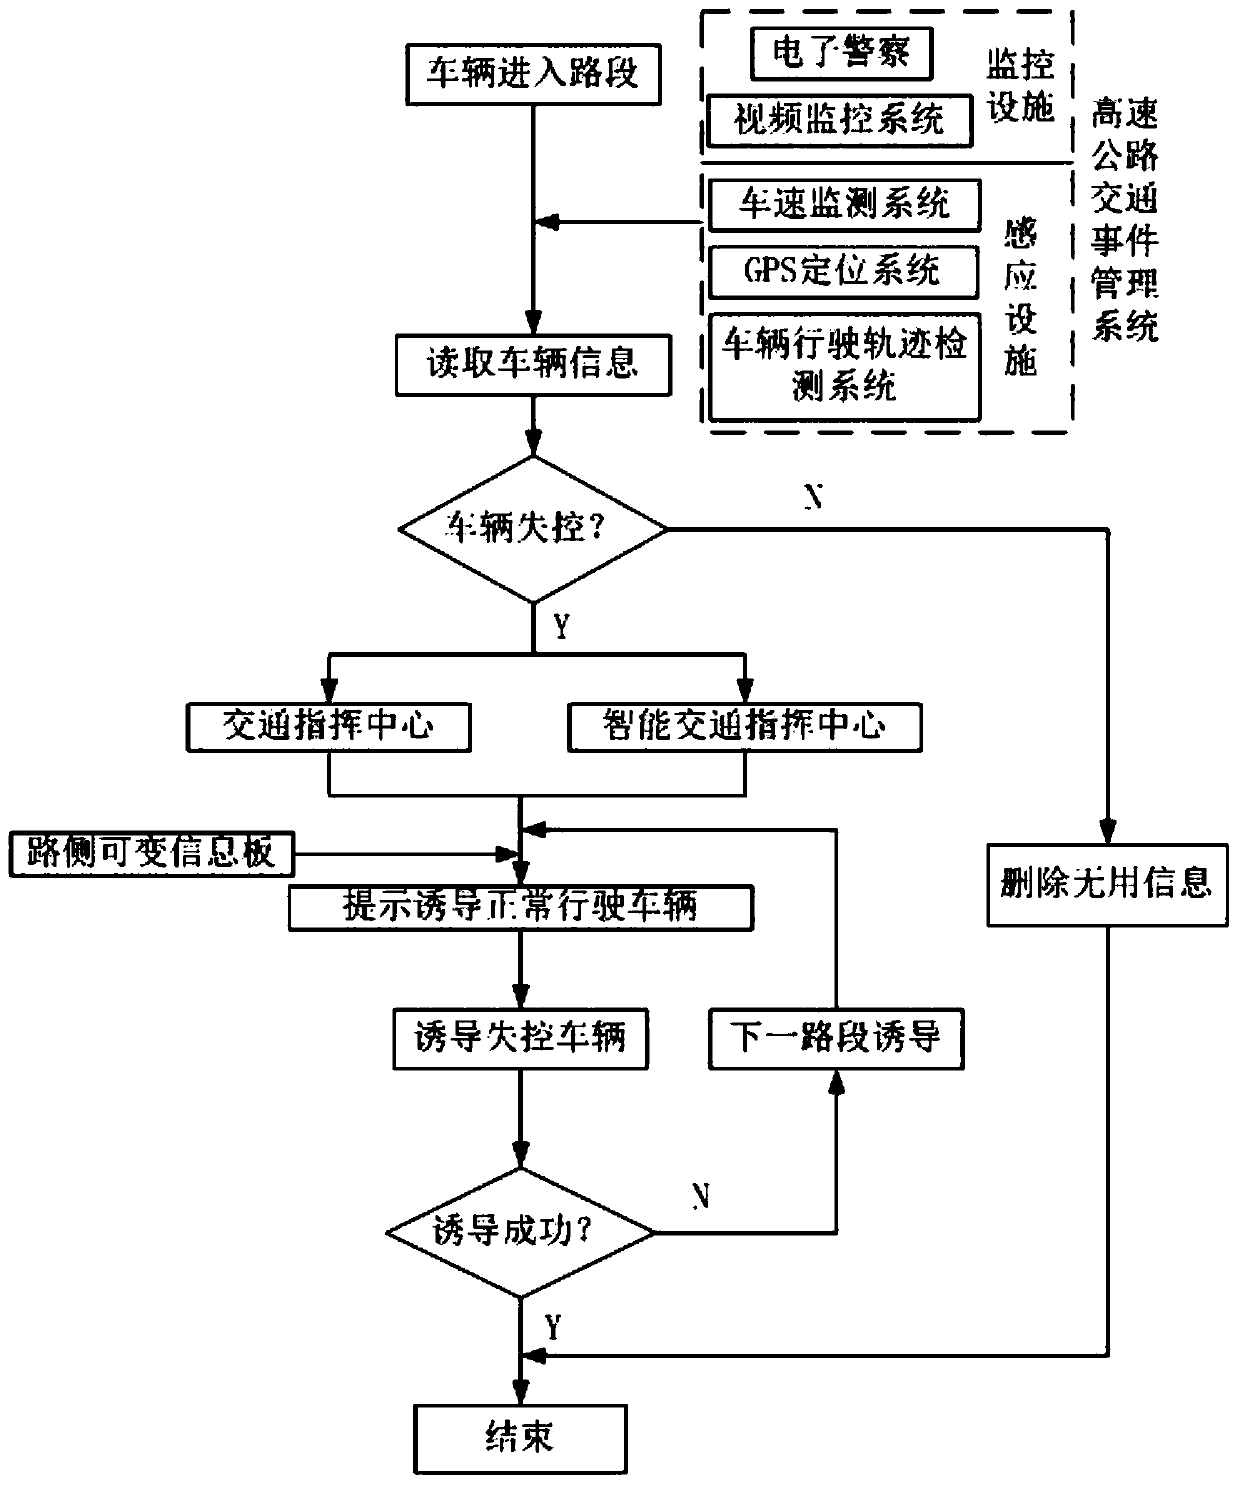 Runaway vehicle guide system and method for long downhill road section of mountain highway